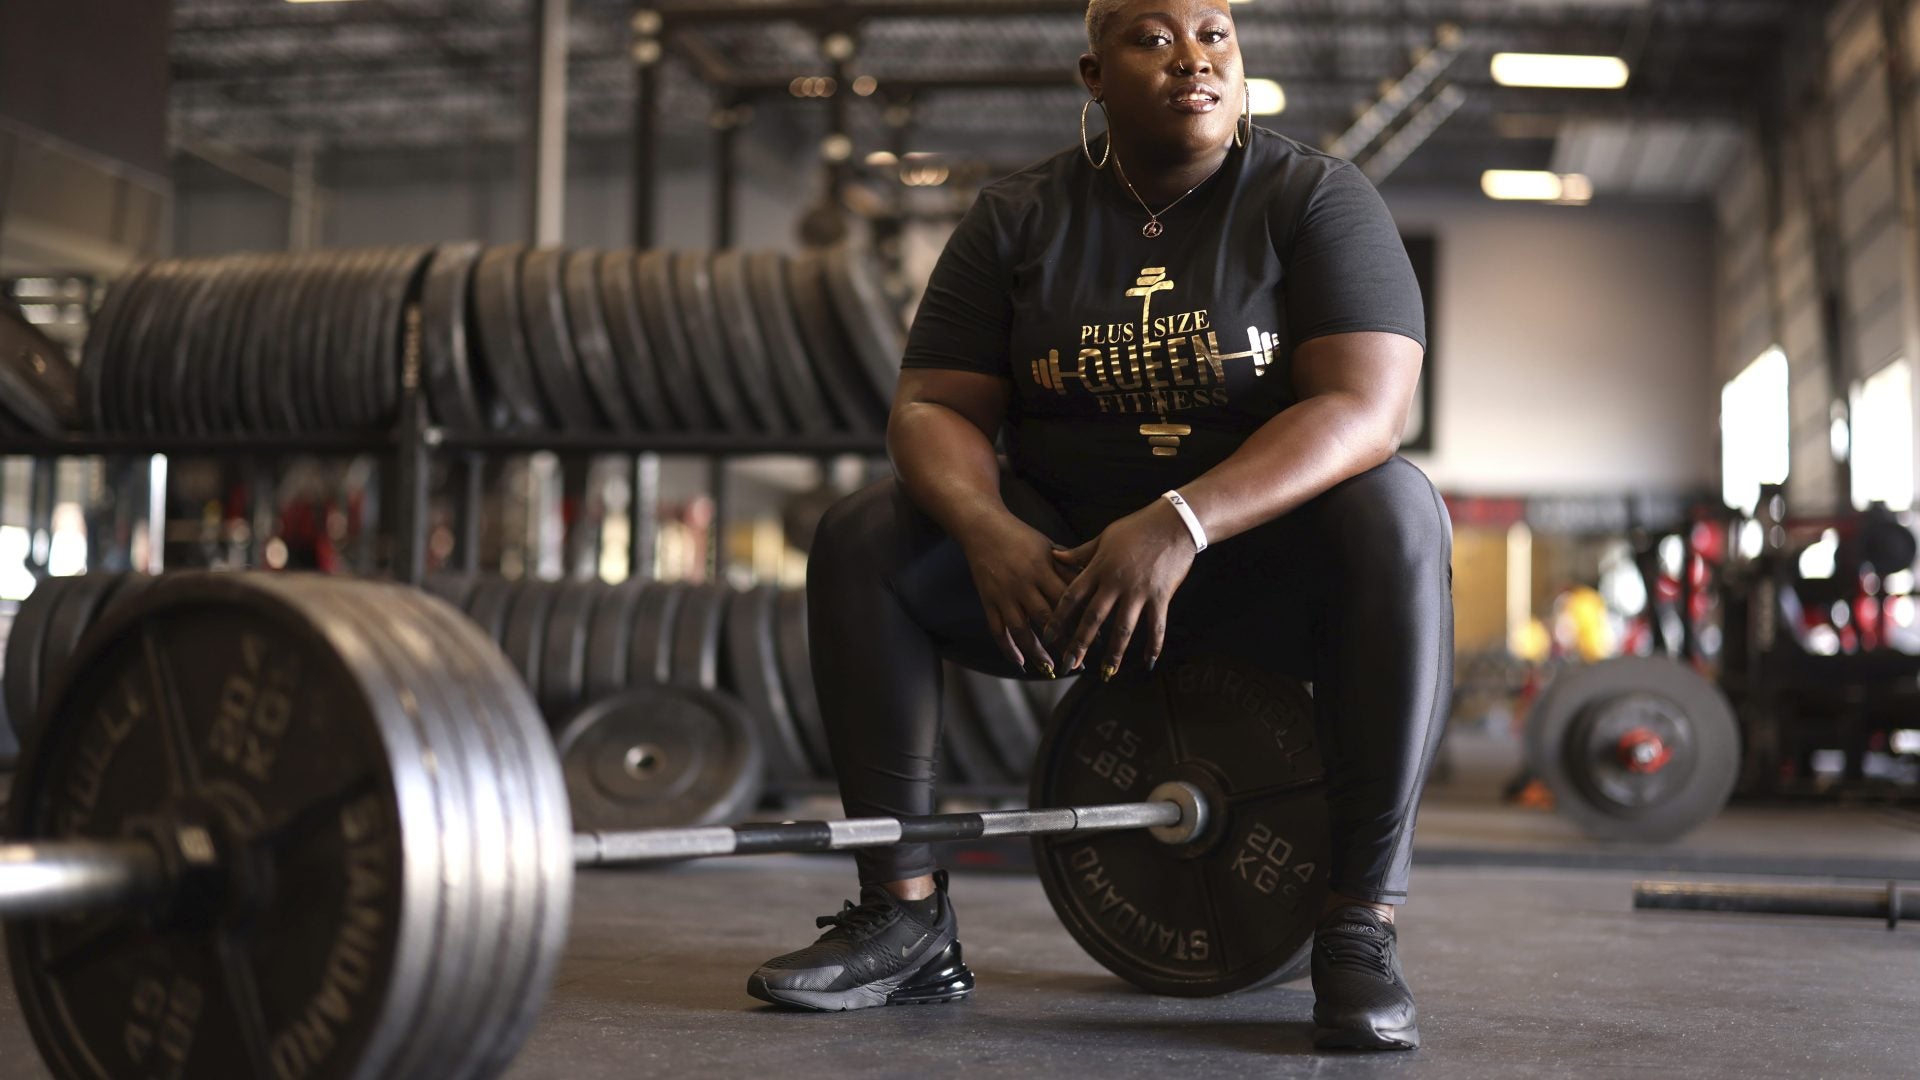 Powerlifter Mother Of Two Sets A New Deadlift World Record